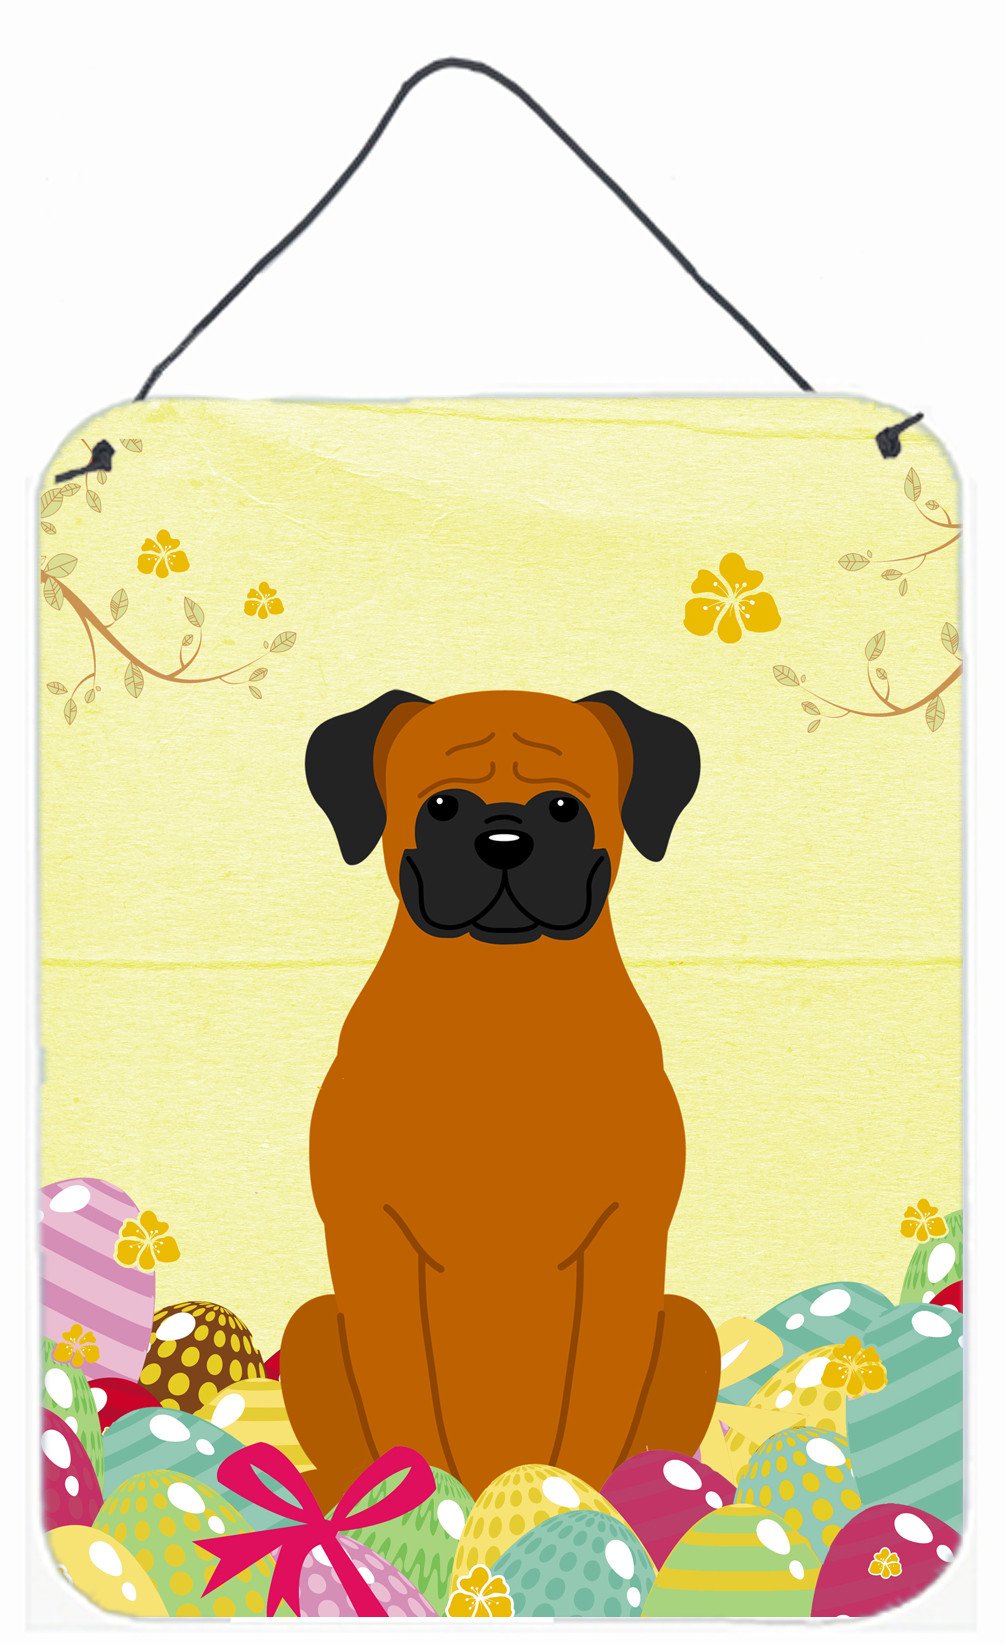 Easter Eggs Fawn Boxer Wall or Door Hanging Prints BB6115DS1216 by Caroline's Treasures